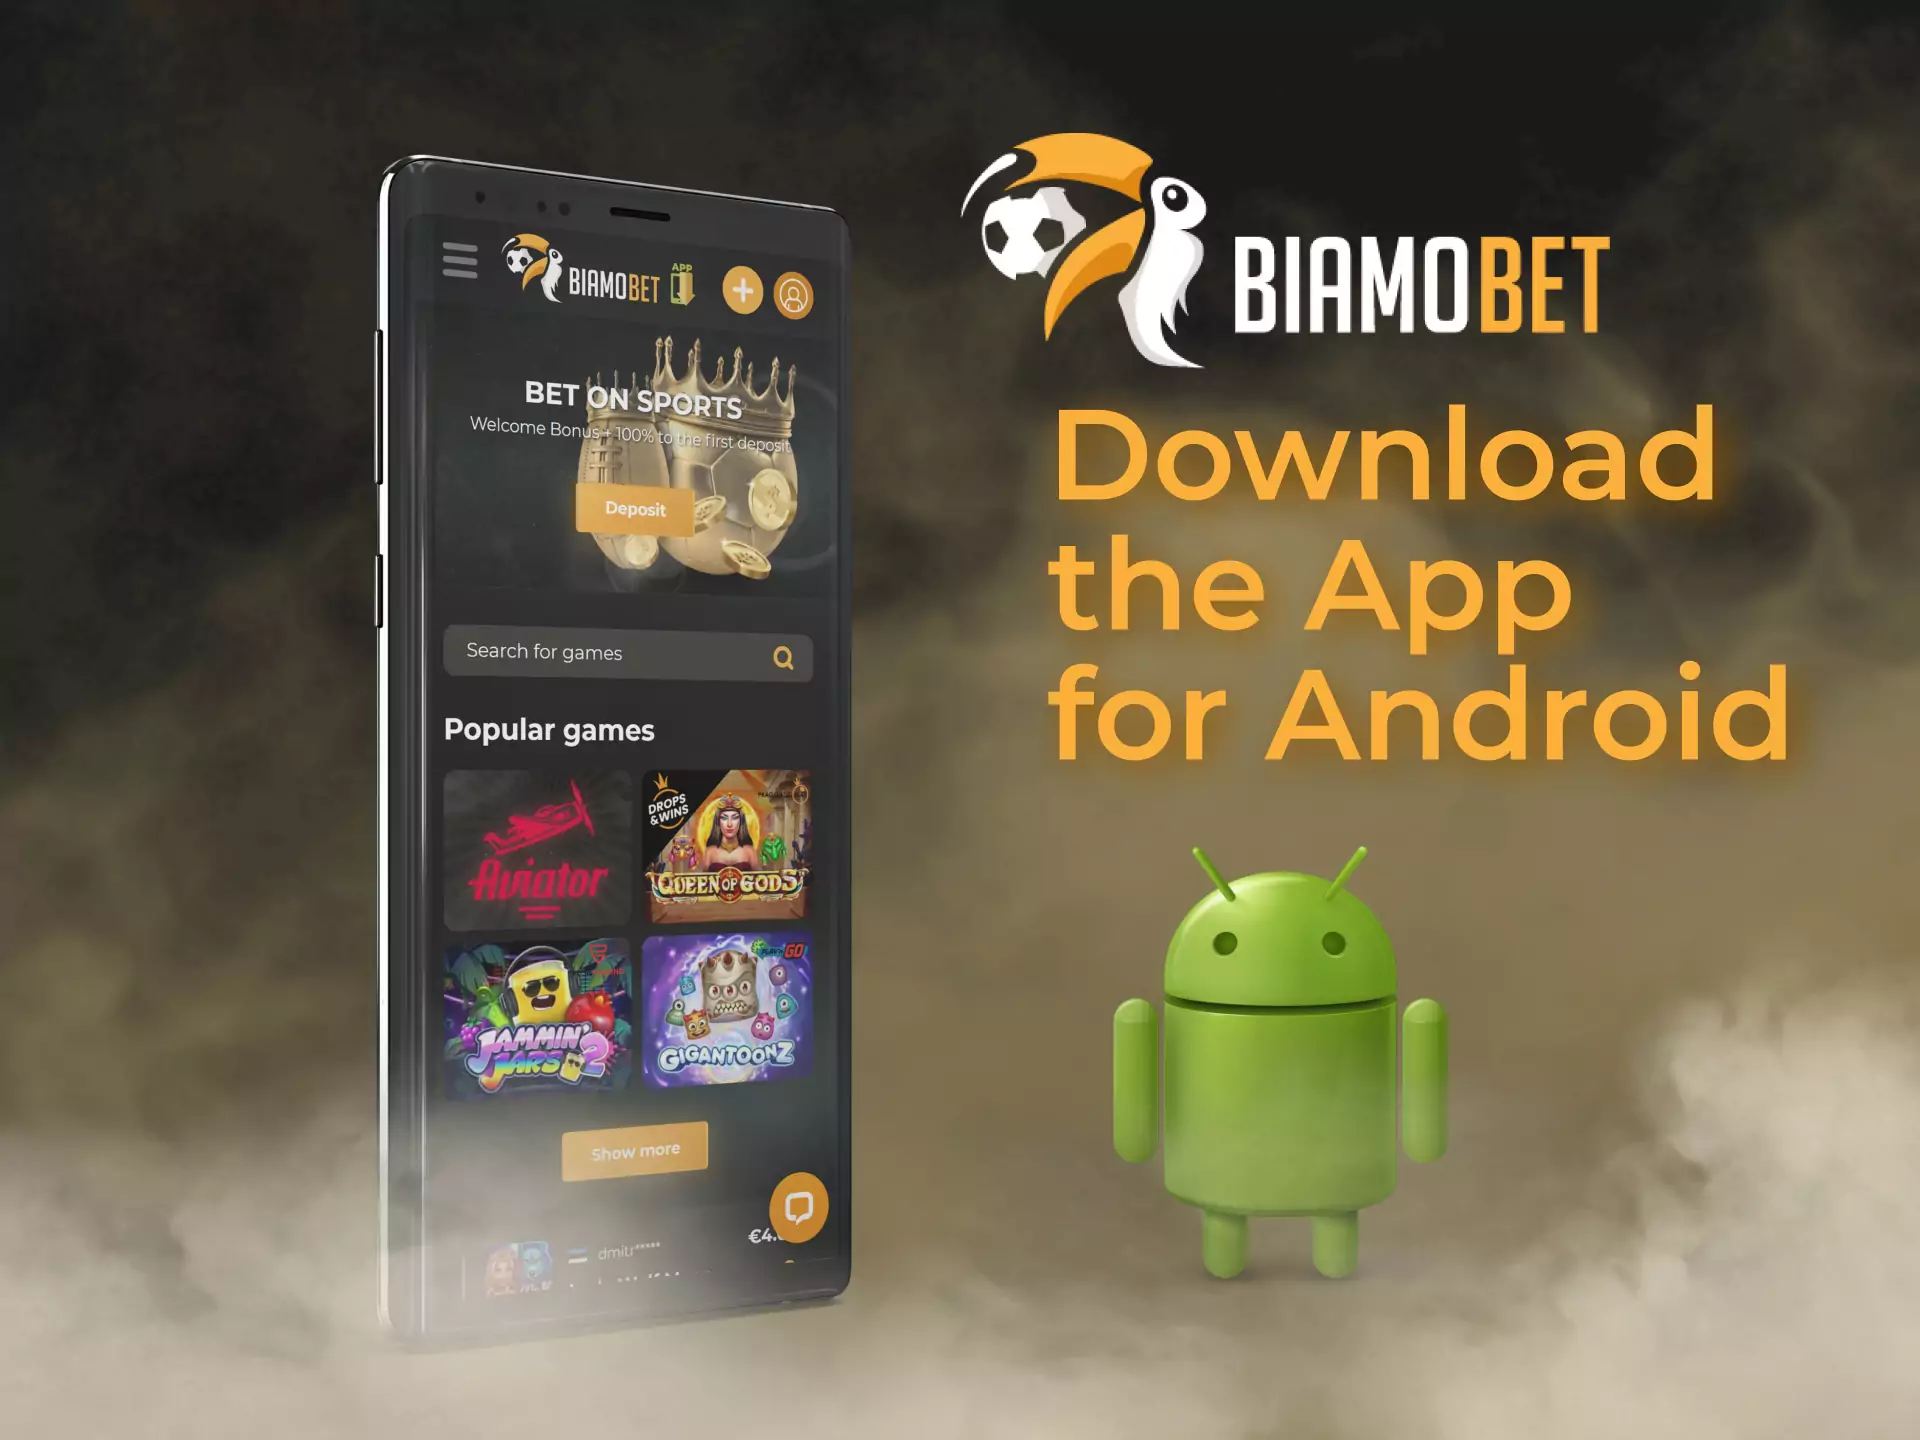 Visit the official Biamobet app to download the apk file.